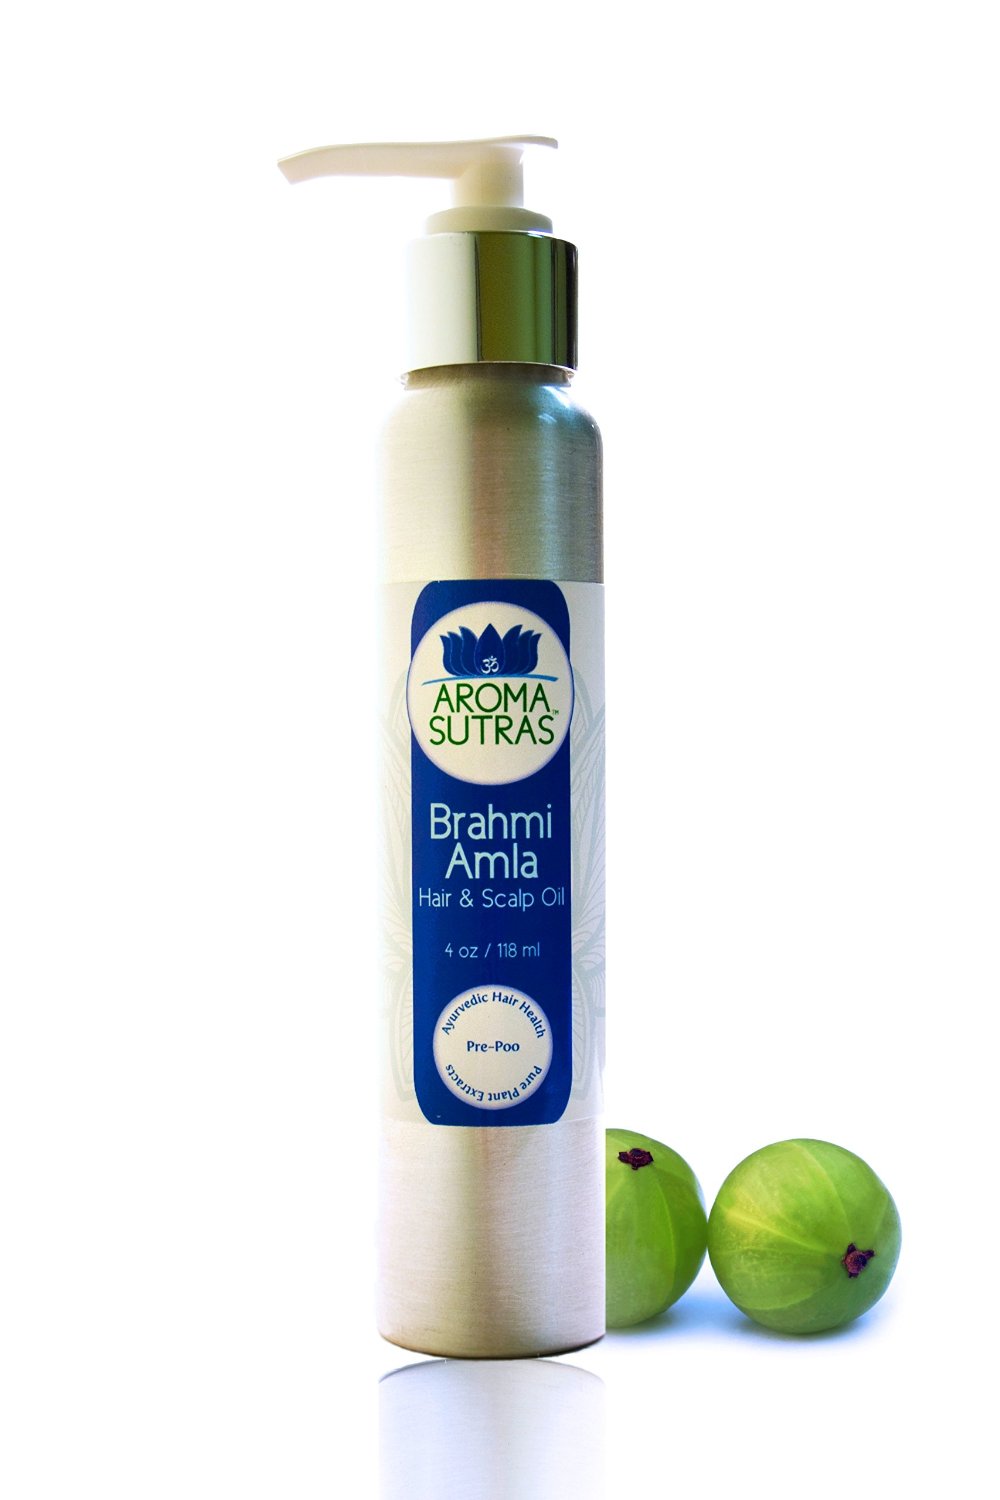 Brahmi Amla Hair Oil to stop Hair loss and prevent greying